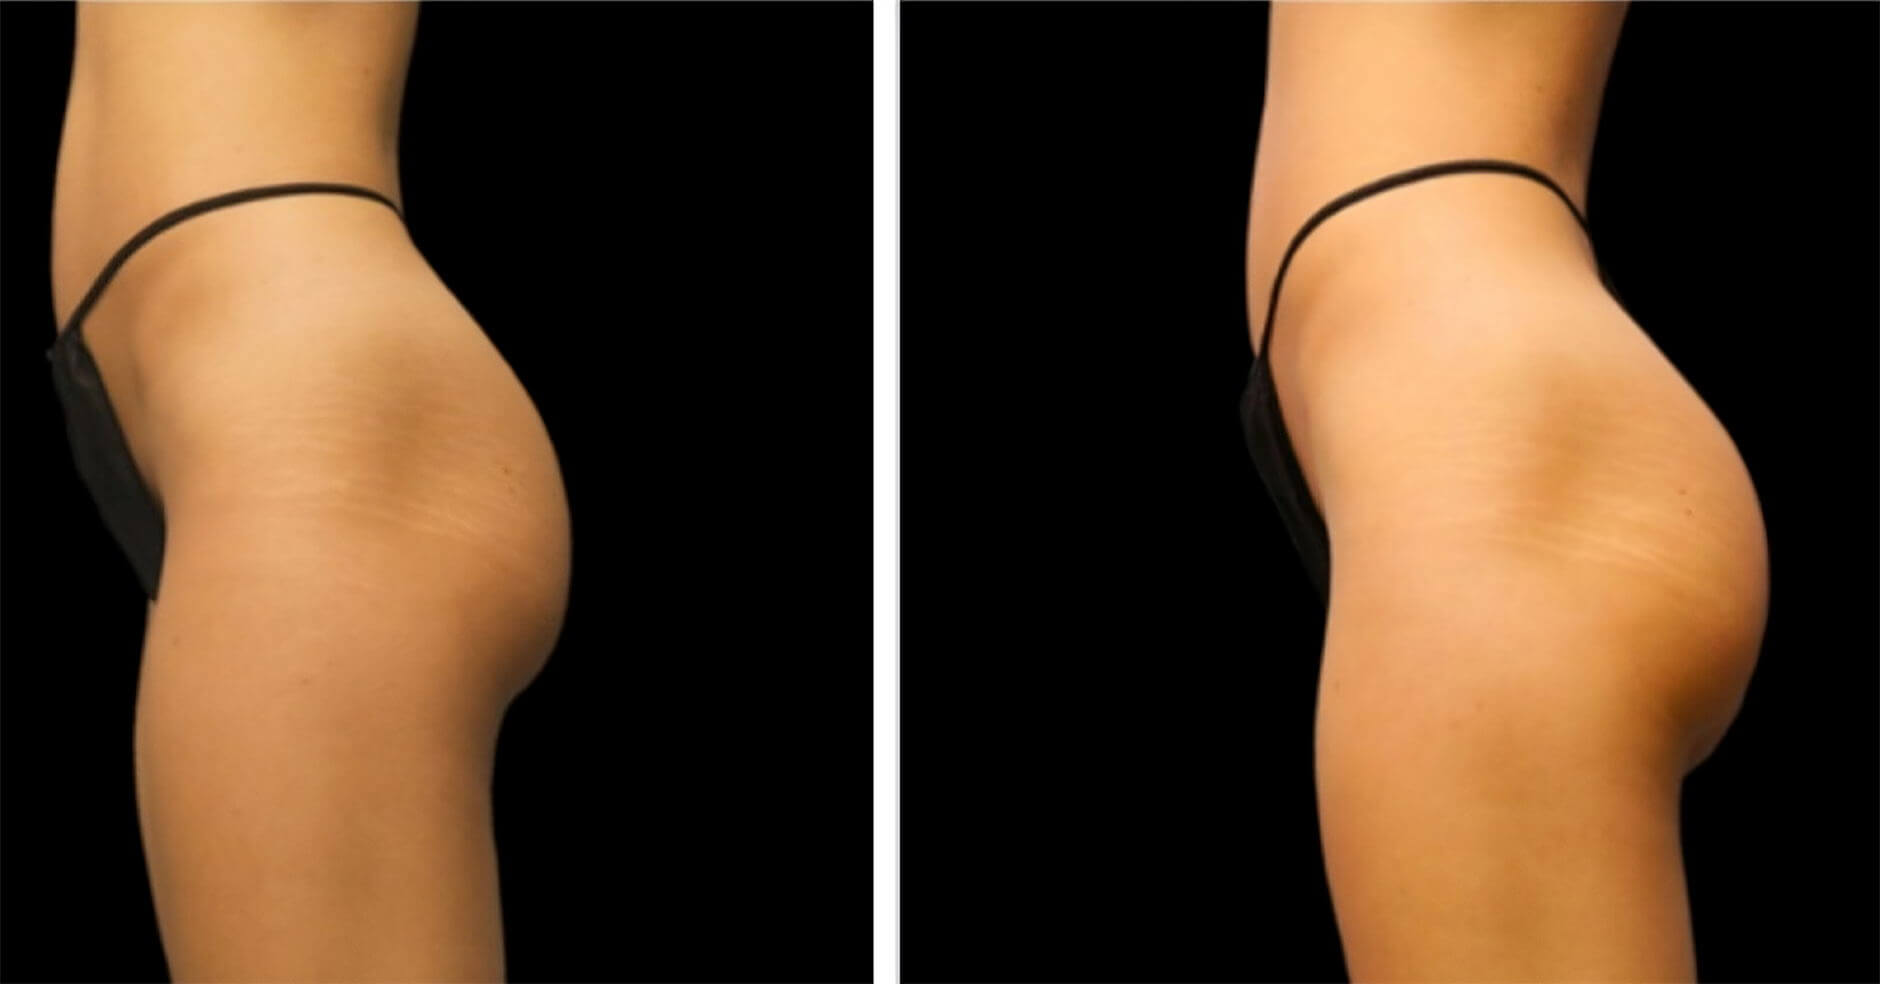 EMSculpt buttrocks before and after image 05